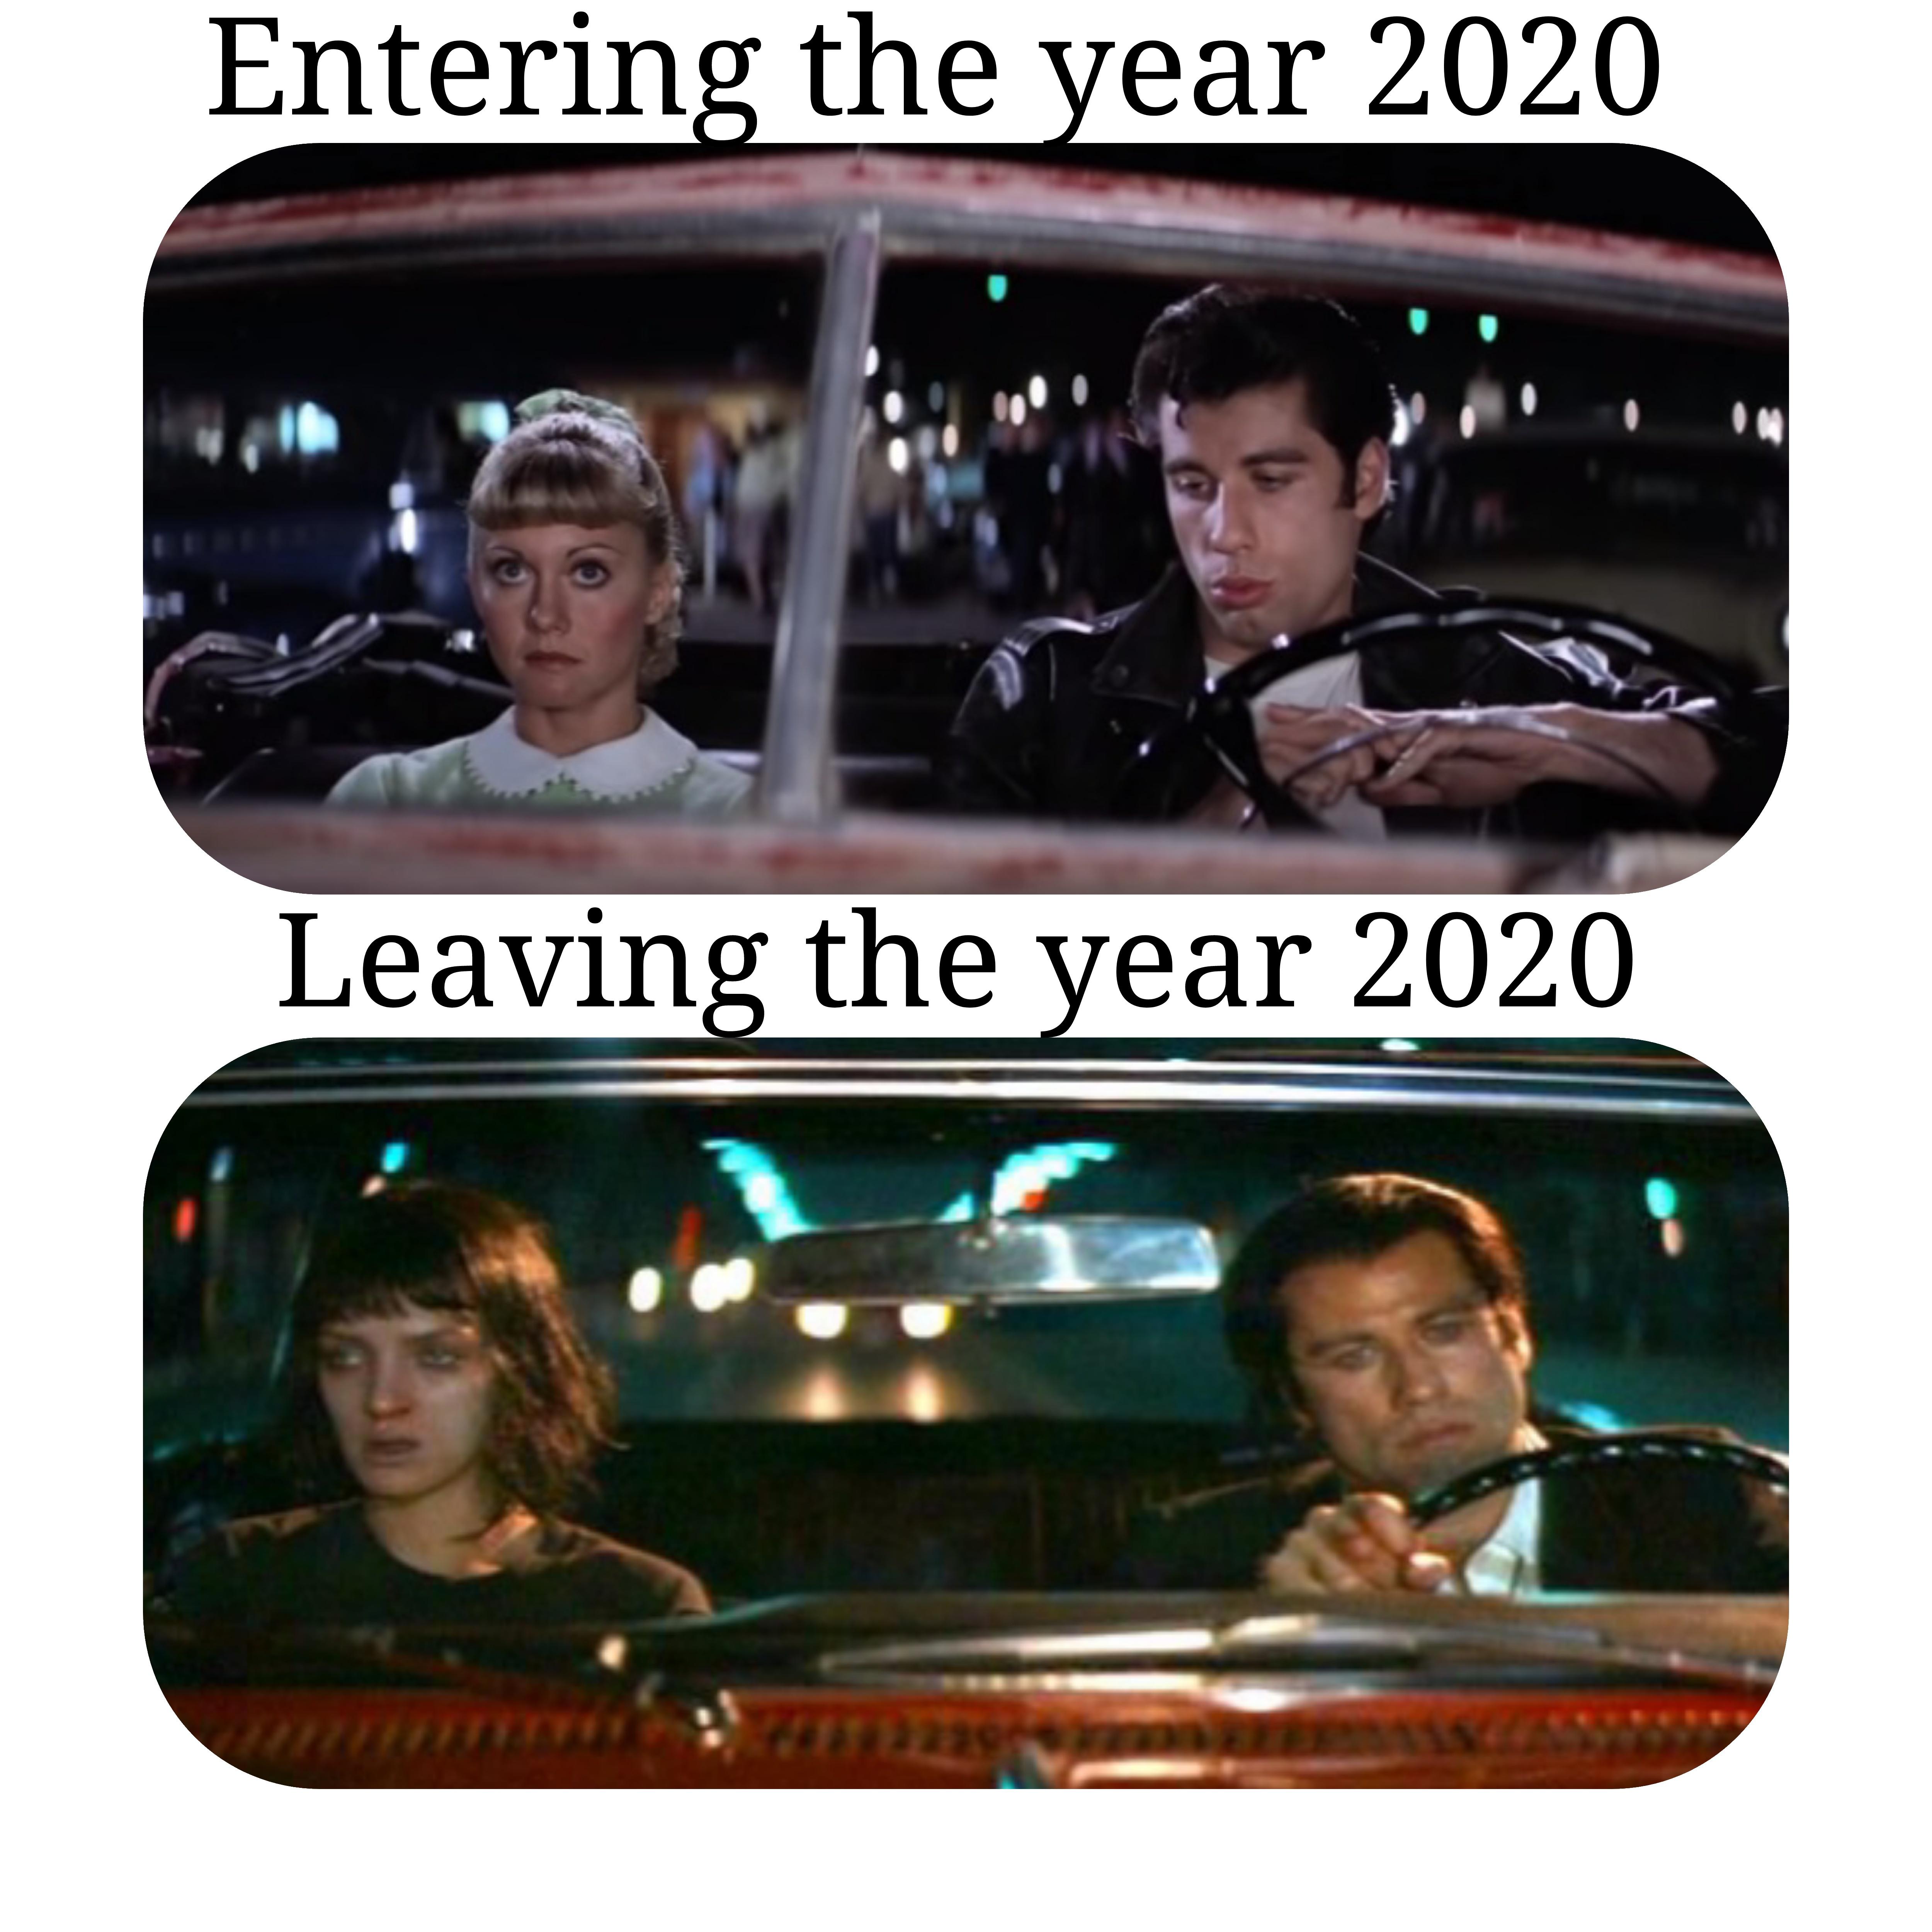 family car - Entering the year 2020 Leaving the year 2020